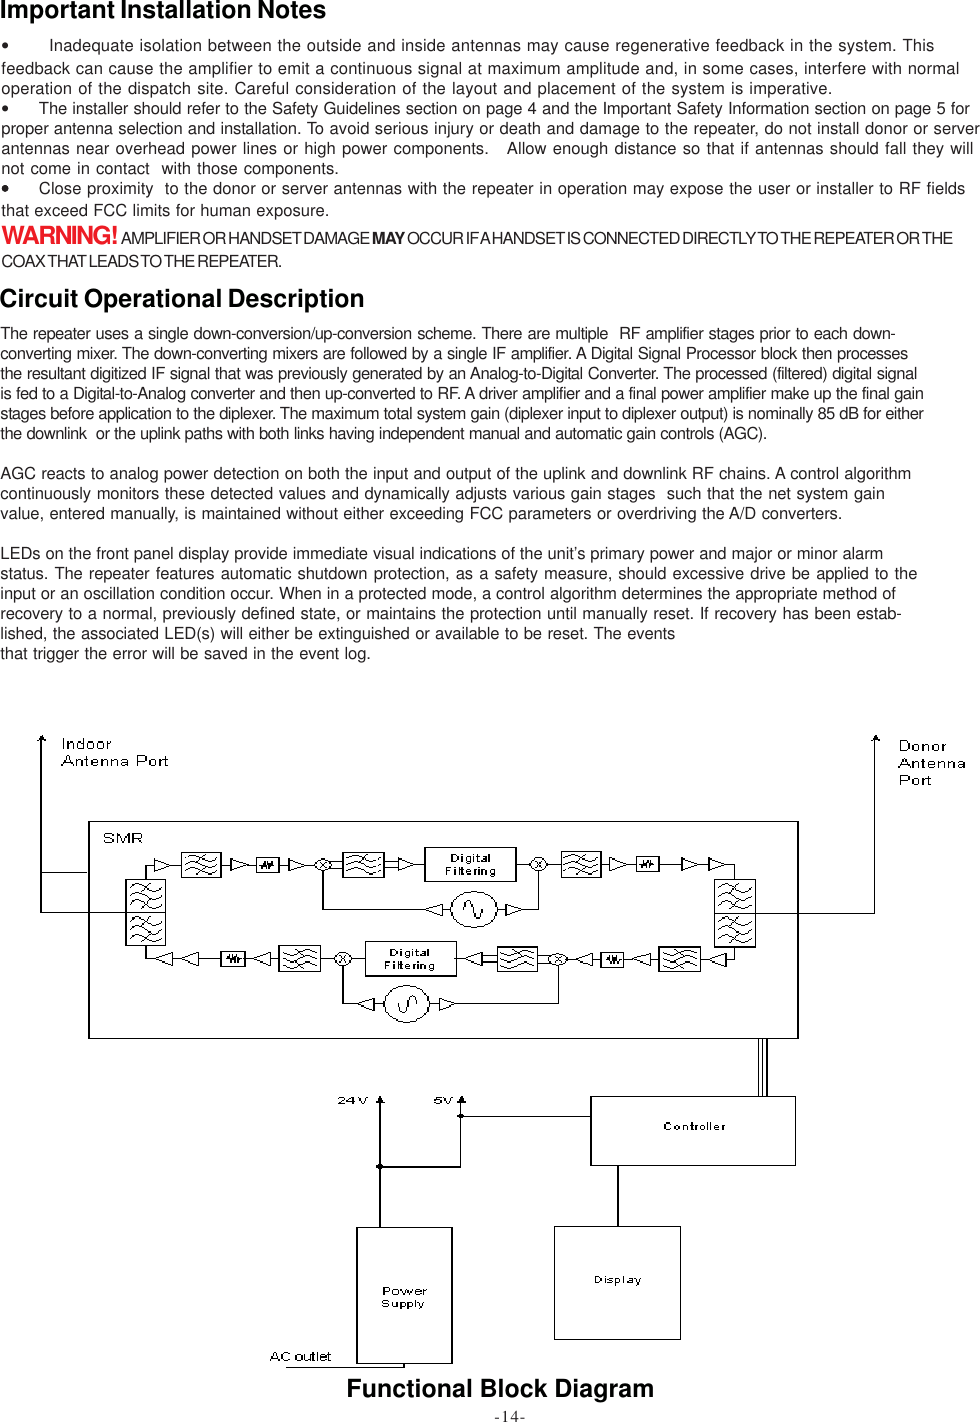 Functional Block Diagram•       Inadequate isolation between the outside and inside antennas may cause regenerative feedback in the system. Thisfeedback can cause the amplifier to emit a continuous signal at maximum amplitude and, in some cases, interfere with normaloperation of the dispatch site. Careful consideration of the layout and placement of the system is imperative.•The installer should refer to the Safety Guidelines section on page 4 and the Important Safety Information section on page 5 forproper antenna selection and installation. To avoid serious injury or death and damage to the repeater, do not install donor or serverantennas near overhead power lines or high power components.   Allow enough distance so that if antennas should fall they willnot come in contact  with those components.•••••Close proximity  to the donor or server antennas with the repeater in operation may expose the user or installer to RF fieldsthat exceed FCC limits for human exposure.WARNING!  AMPLIFIER OR HANDSET DAMAGE MAY OCCUR IF A HANDSET IS CONNECTED DIRECTLY TO THE REPEATER OR THECOAX THAT LEADS TO THE REPEATER.Important Installation NotesThe repeater uses a single down-conversion/up-conversion scheme. There are multiple  RF amplifier stages prior to each down-converting mixer. The down-converting mixers are followed by a single IF amplifier. A Digital Signal Processor block then processesthe resultant digitized IF signal that was previously generated by an Analog-to-Digital Converter. The processed (filtered) digital signalis fed to a Digital-to-Analog converter and then up-converted to RF. A driver amplifier and a final power amplifier make up the final gainstages before application to the diplexer. The maximum total system gain (diplexer input to diplexer output) is nominally 85 dB for eitherthe downlink  or the uplink paths with both links having independent manual and automatic gain controls (AGC).AGC reacts to analog power detection on both the input and output of the uplink and downlink RF chains. A control algorithmcontinuously monitors these detected values and dynamically adjusts various gain stages  such that the net system gainvalue, entered manually, is maintained without either exceeding FCC parameters or overdriving the A/D converters.LEDs on the front panel display provide immediate visual indications of the unit’s primary power and major or minor alarmstatus. The repeater features automatic shutdown protection, as a safety measure, should excessive drive be applied to theinput or an oscillation condition occur. When in a protected mode, a control algorithm determines the appropriate method ofrecovery to a normal, previously defined state, or maintains the protection until manually reset. If recovery has been estab-lished, the associated LED(s) will either be extinguished or available to be reset. The eventsthat trigger the error will be saved in the event log.Circuit Operational Description-14-